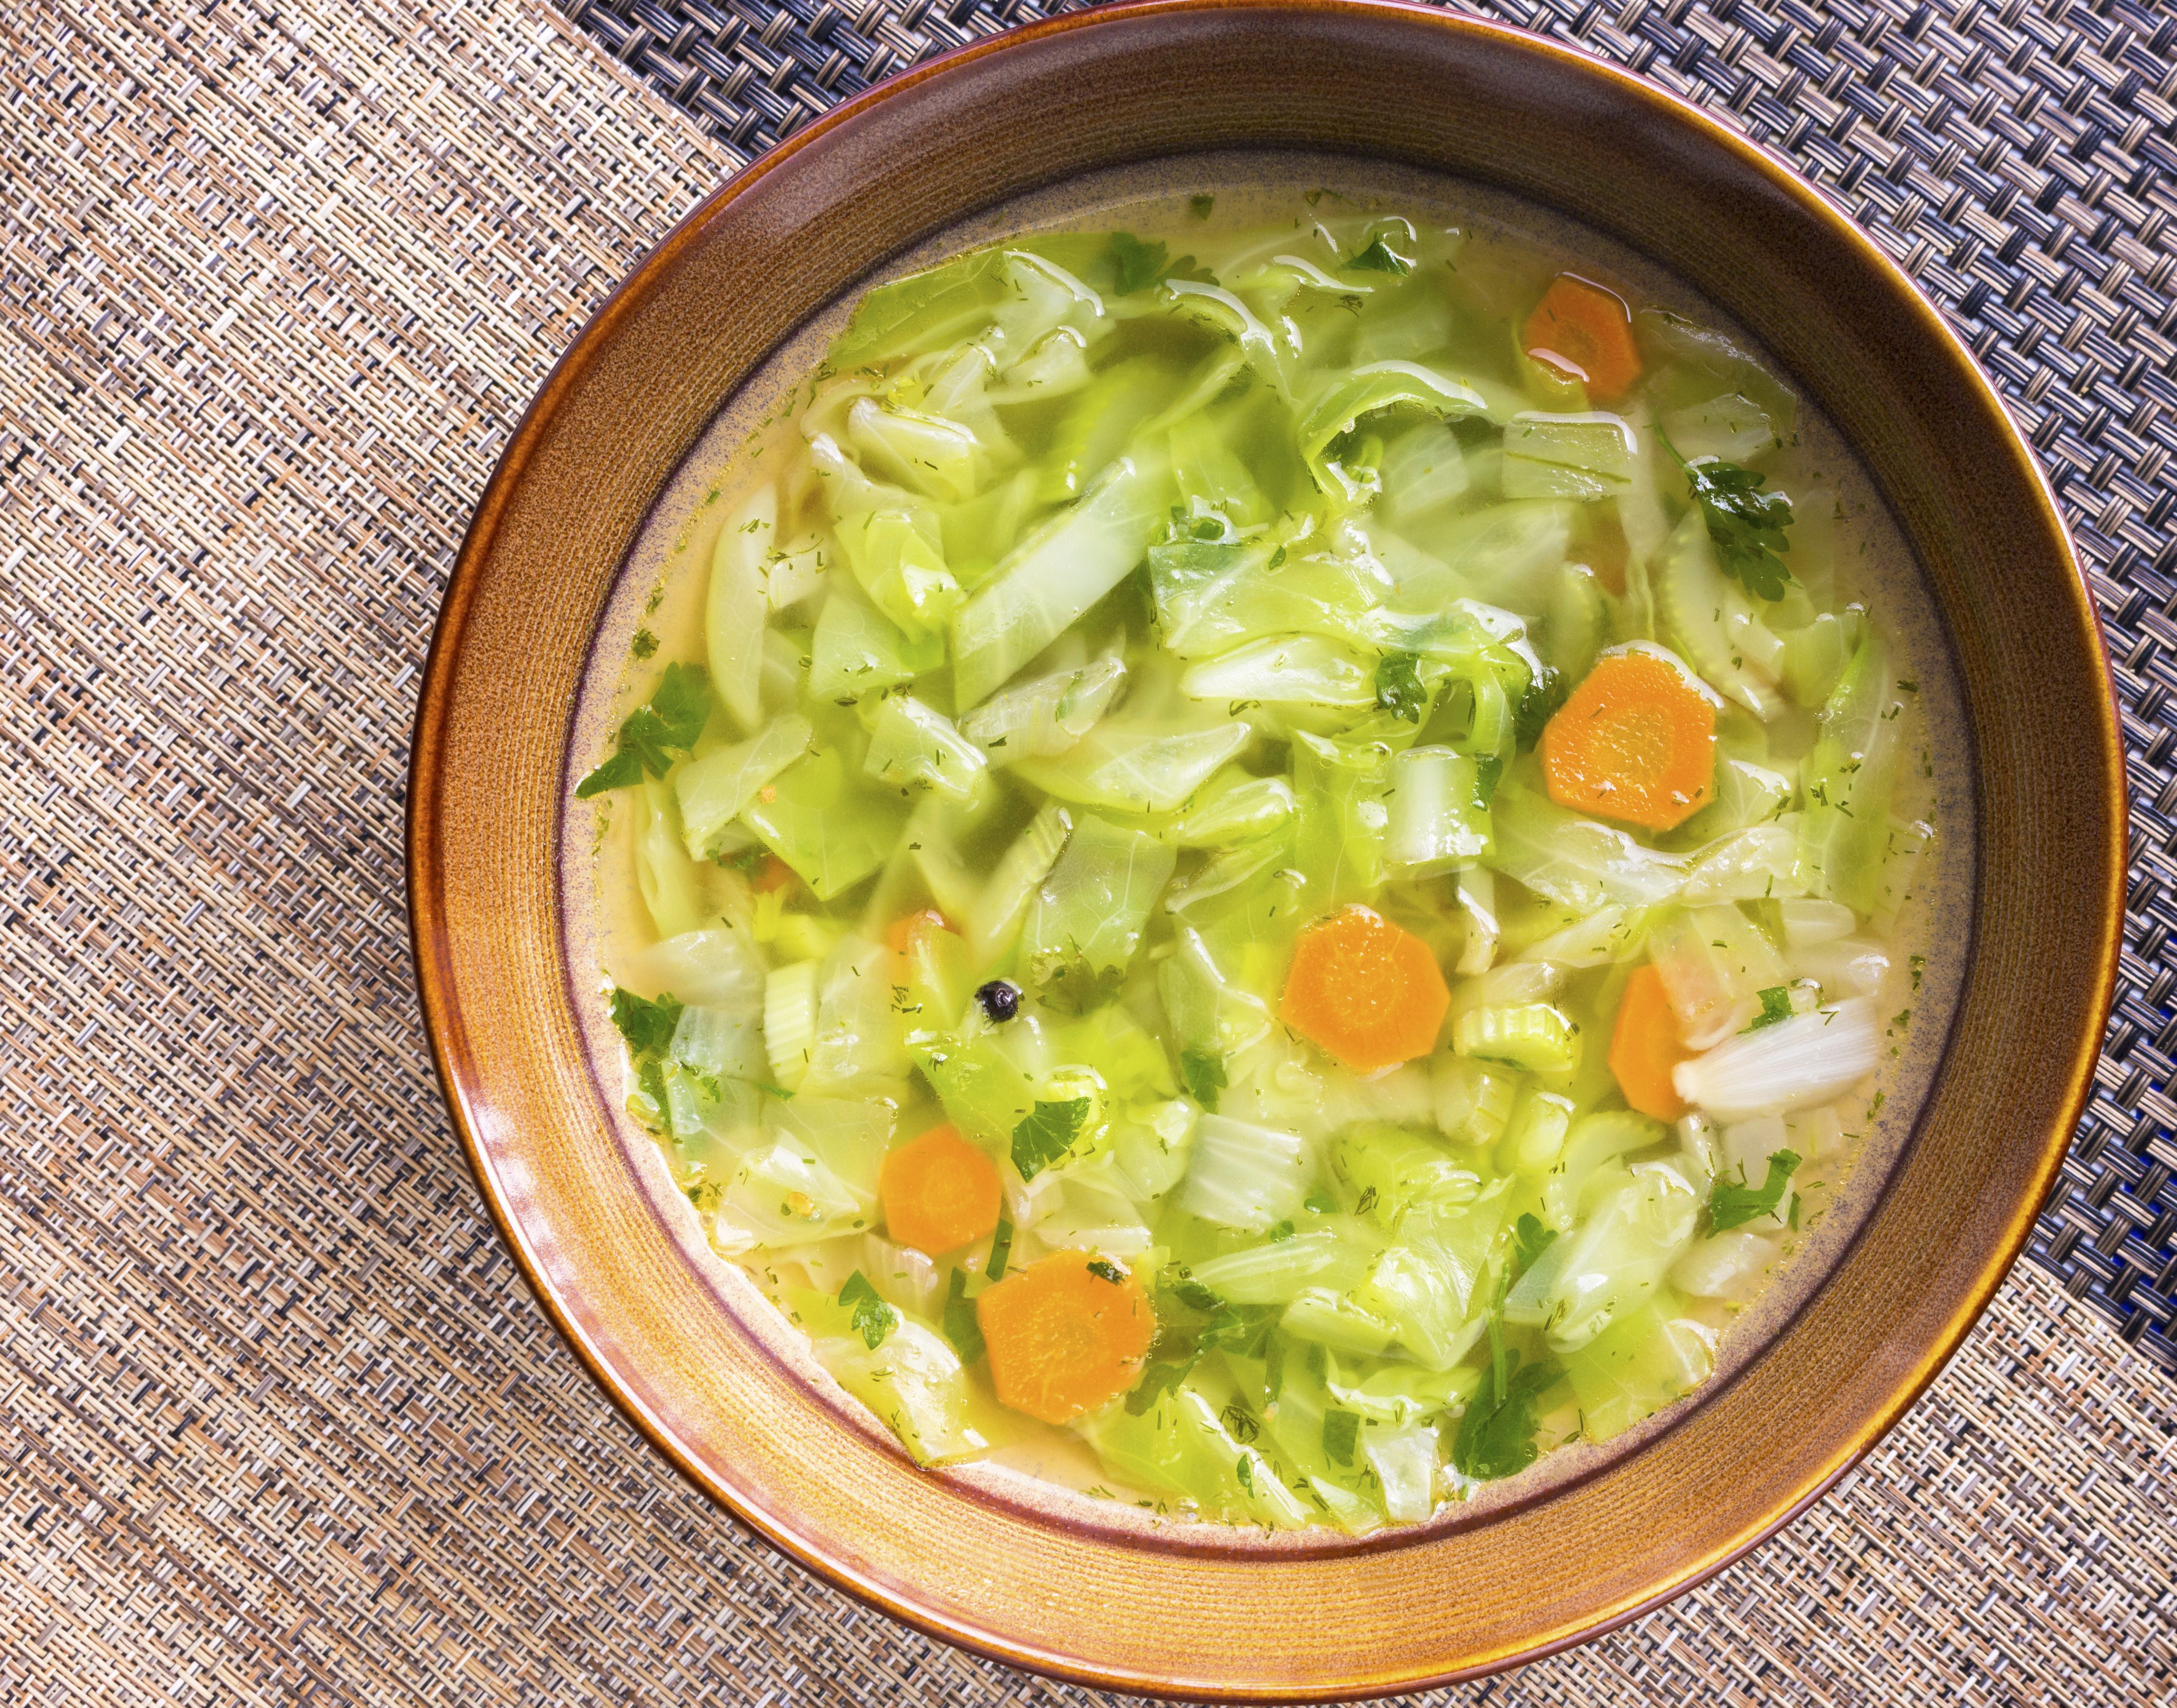 10 Things You Need to Know About the Cabbage Soup Diet